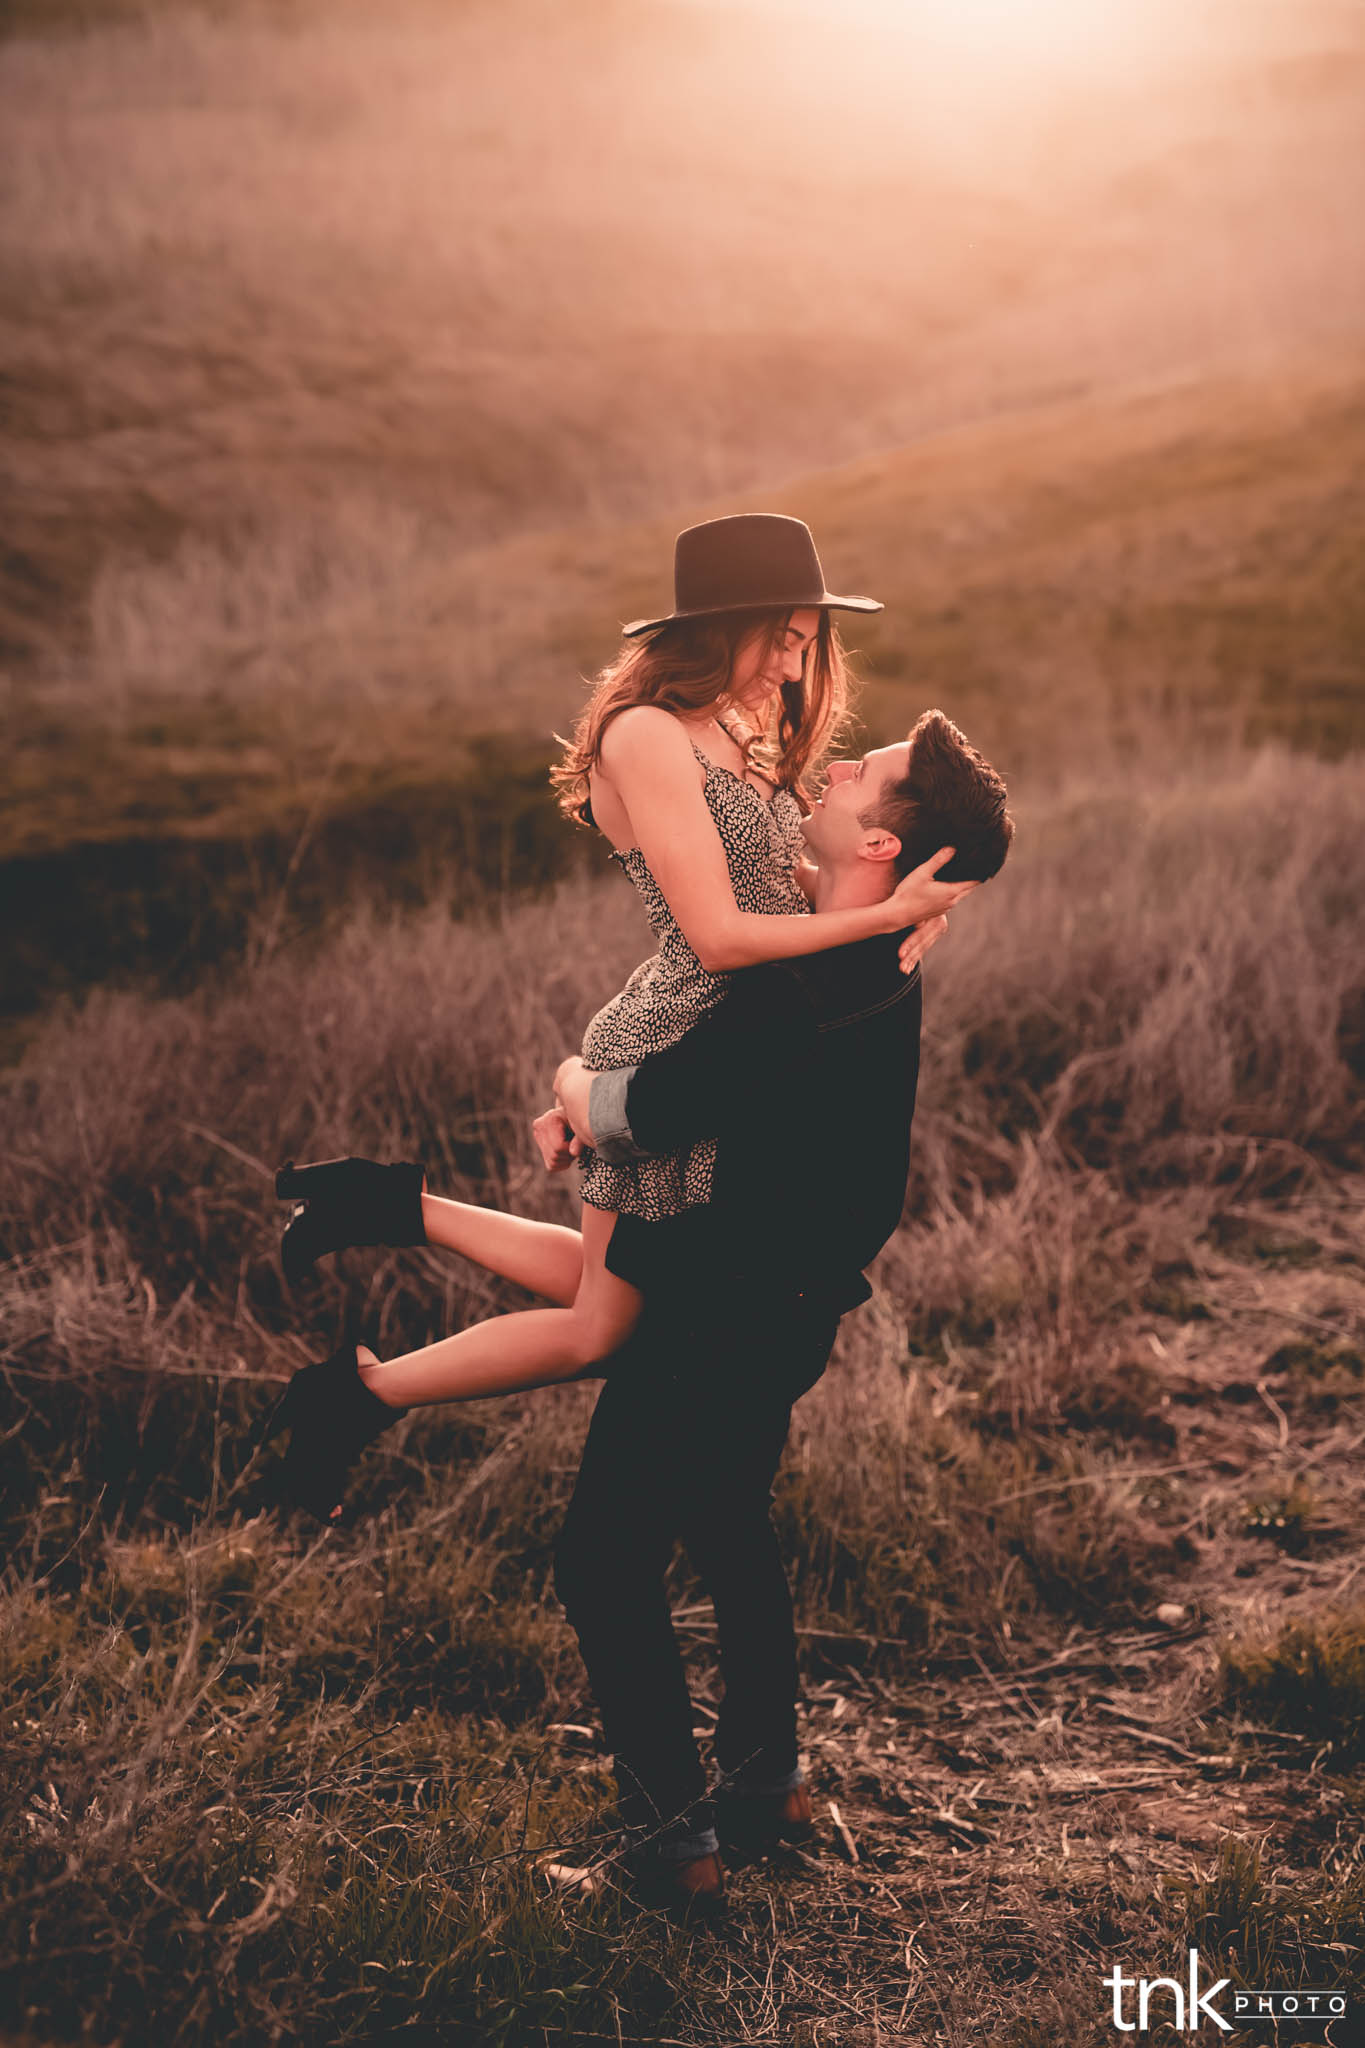 Couple Photography: Capturing Love and Connection